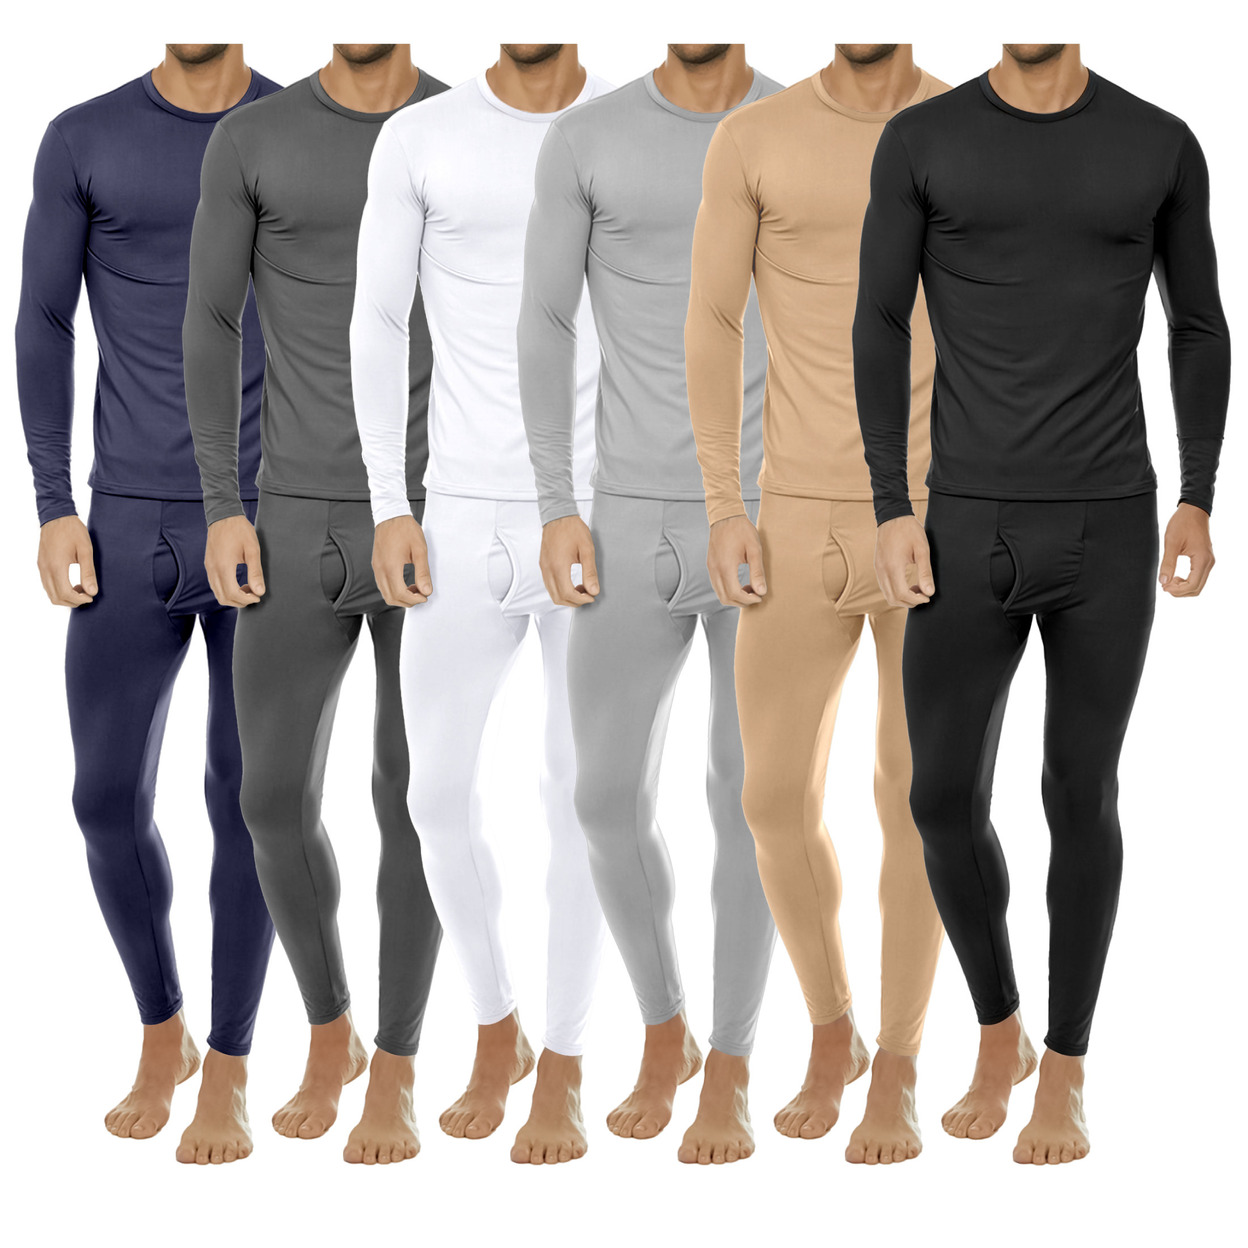 2-Pieces: Men's Winter Warm Fleece Lined Thermal Underwear Set For Cold Weather - Black, Small